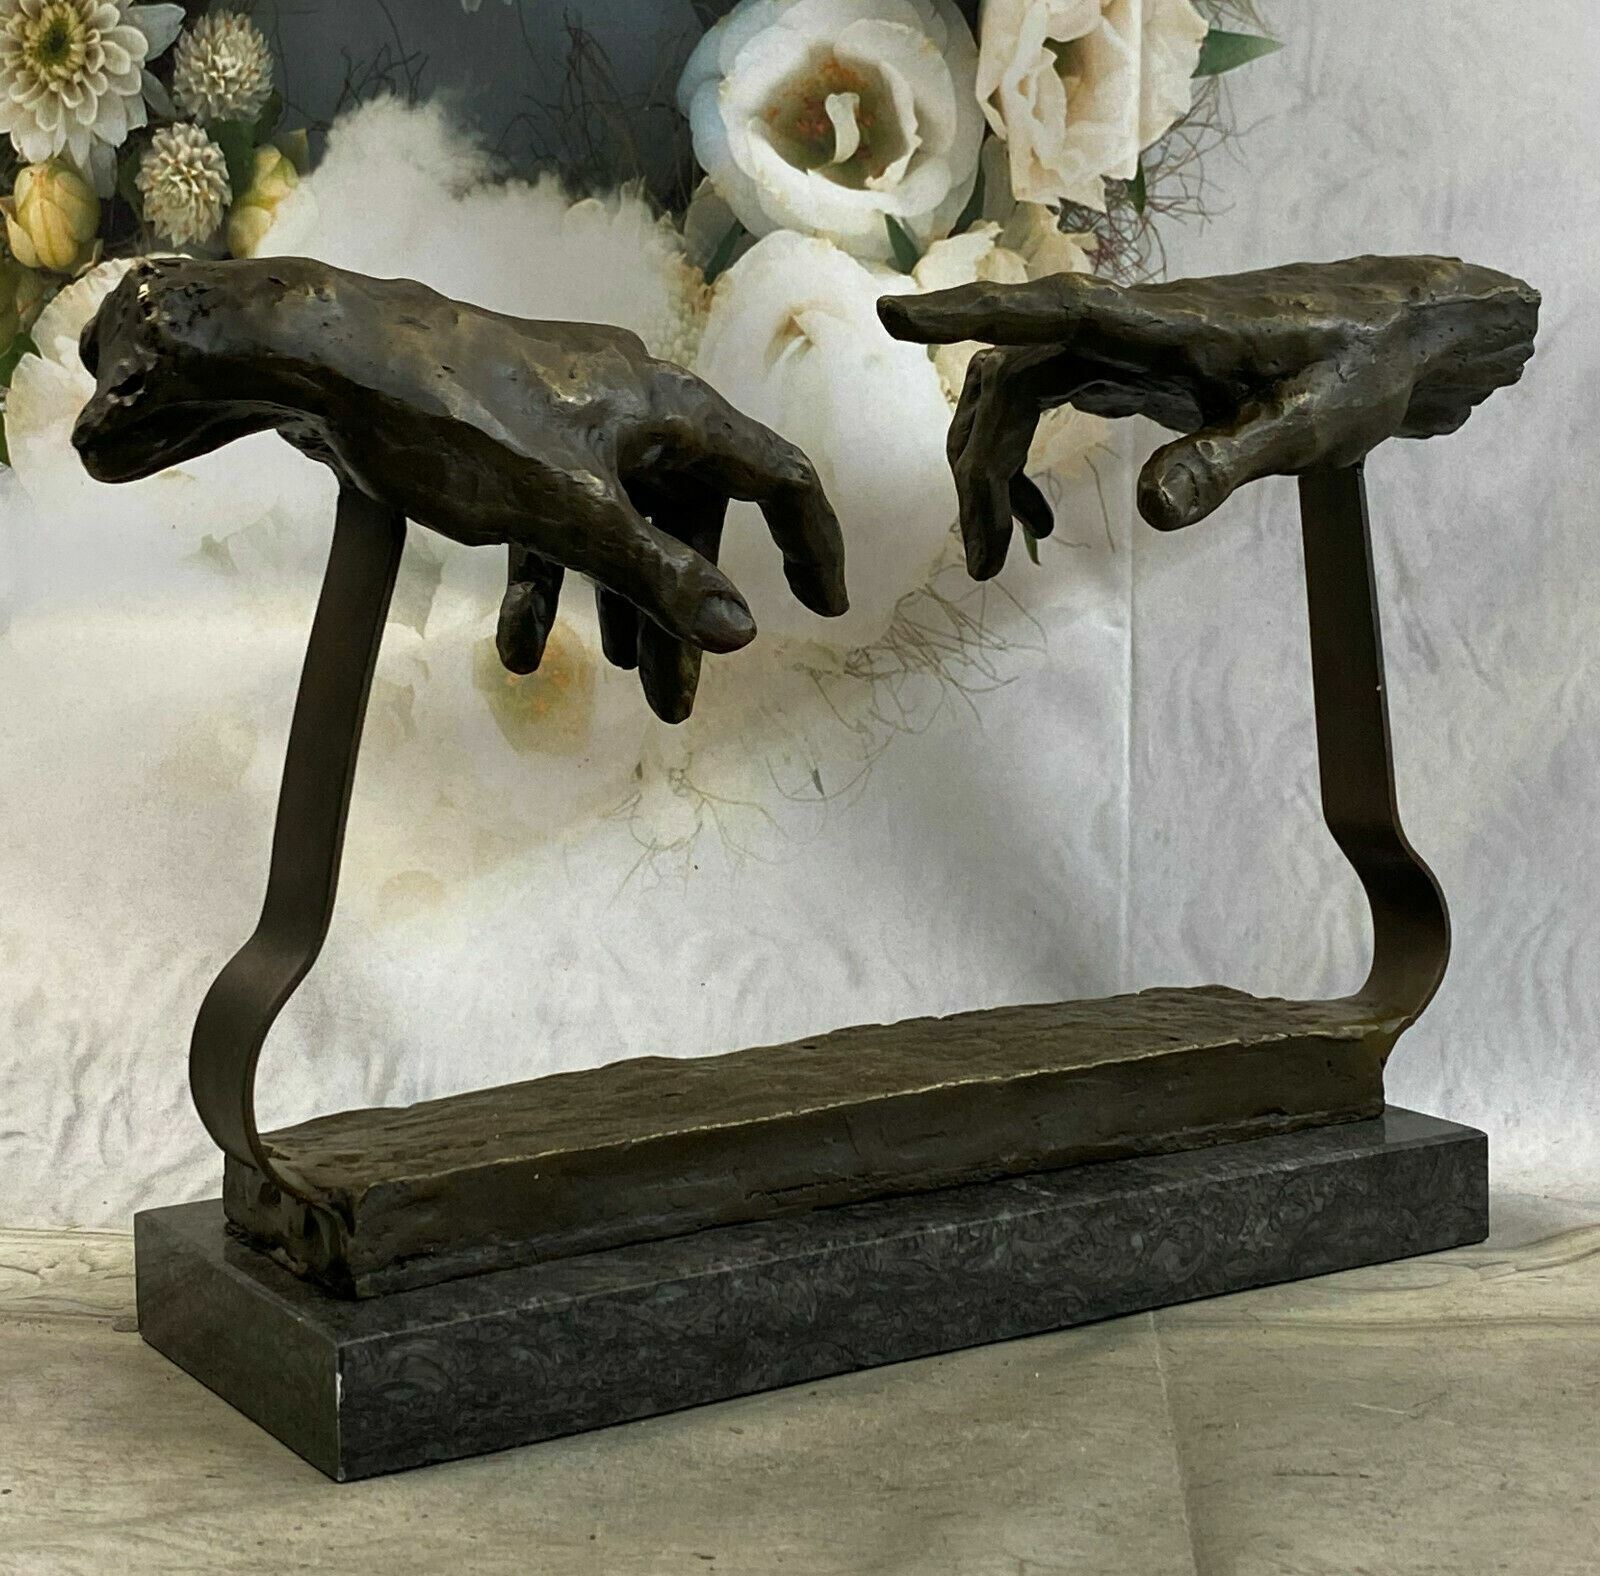 BEAUTIFUL QUALITY PURE BRONZE DALI ABSTRACT TOUCH HANDS SCULPTURE SUBSTANTIAL NR